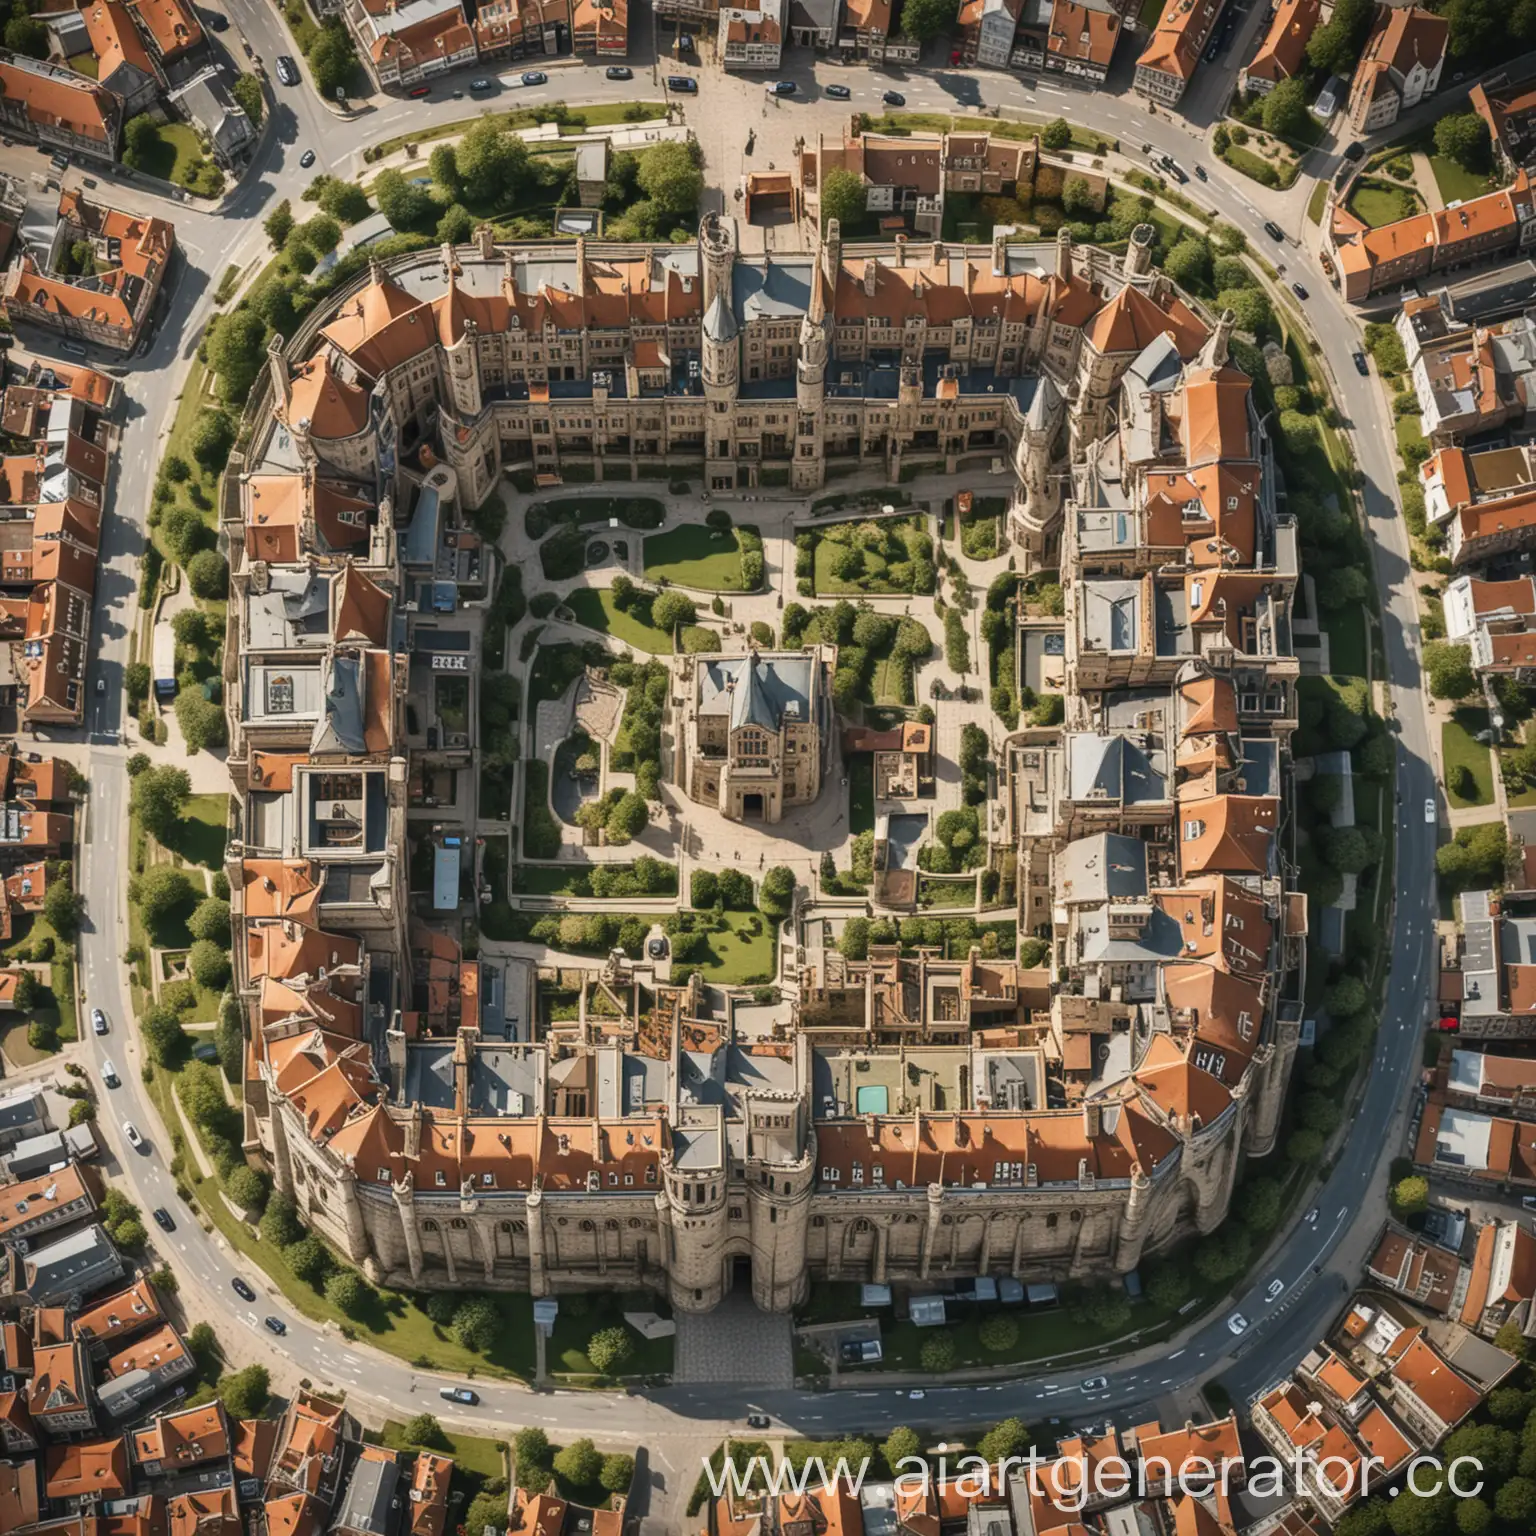 TopDown-View-of-EnglishStyle-Castle-and-City-Layout